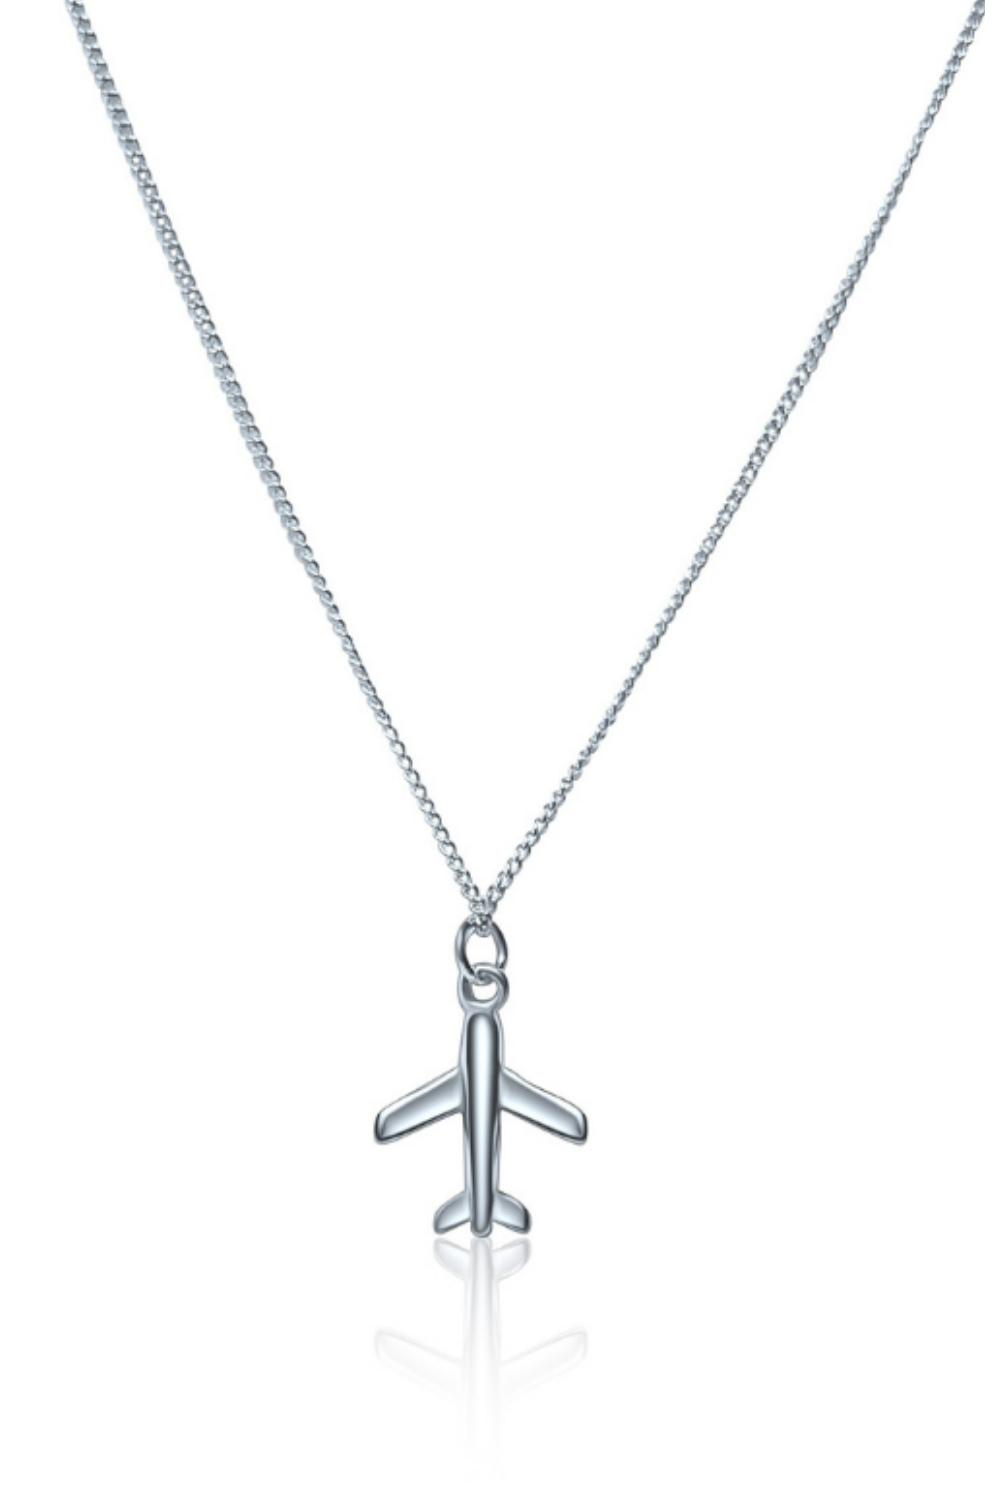 Airplane Necklace for Men - Amelia Aviation